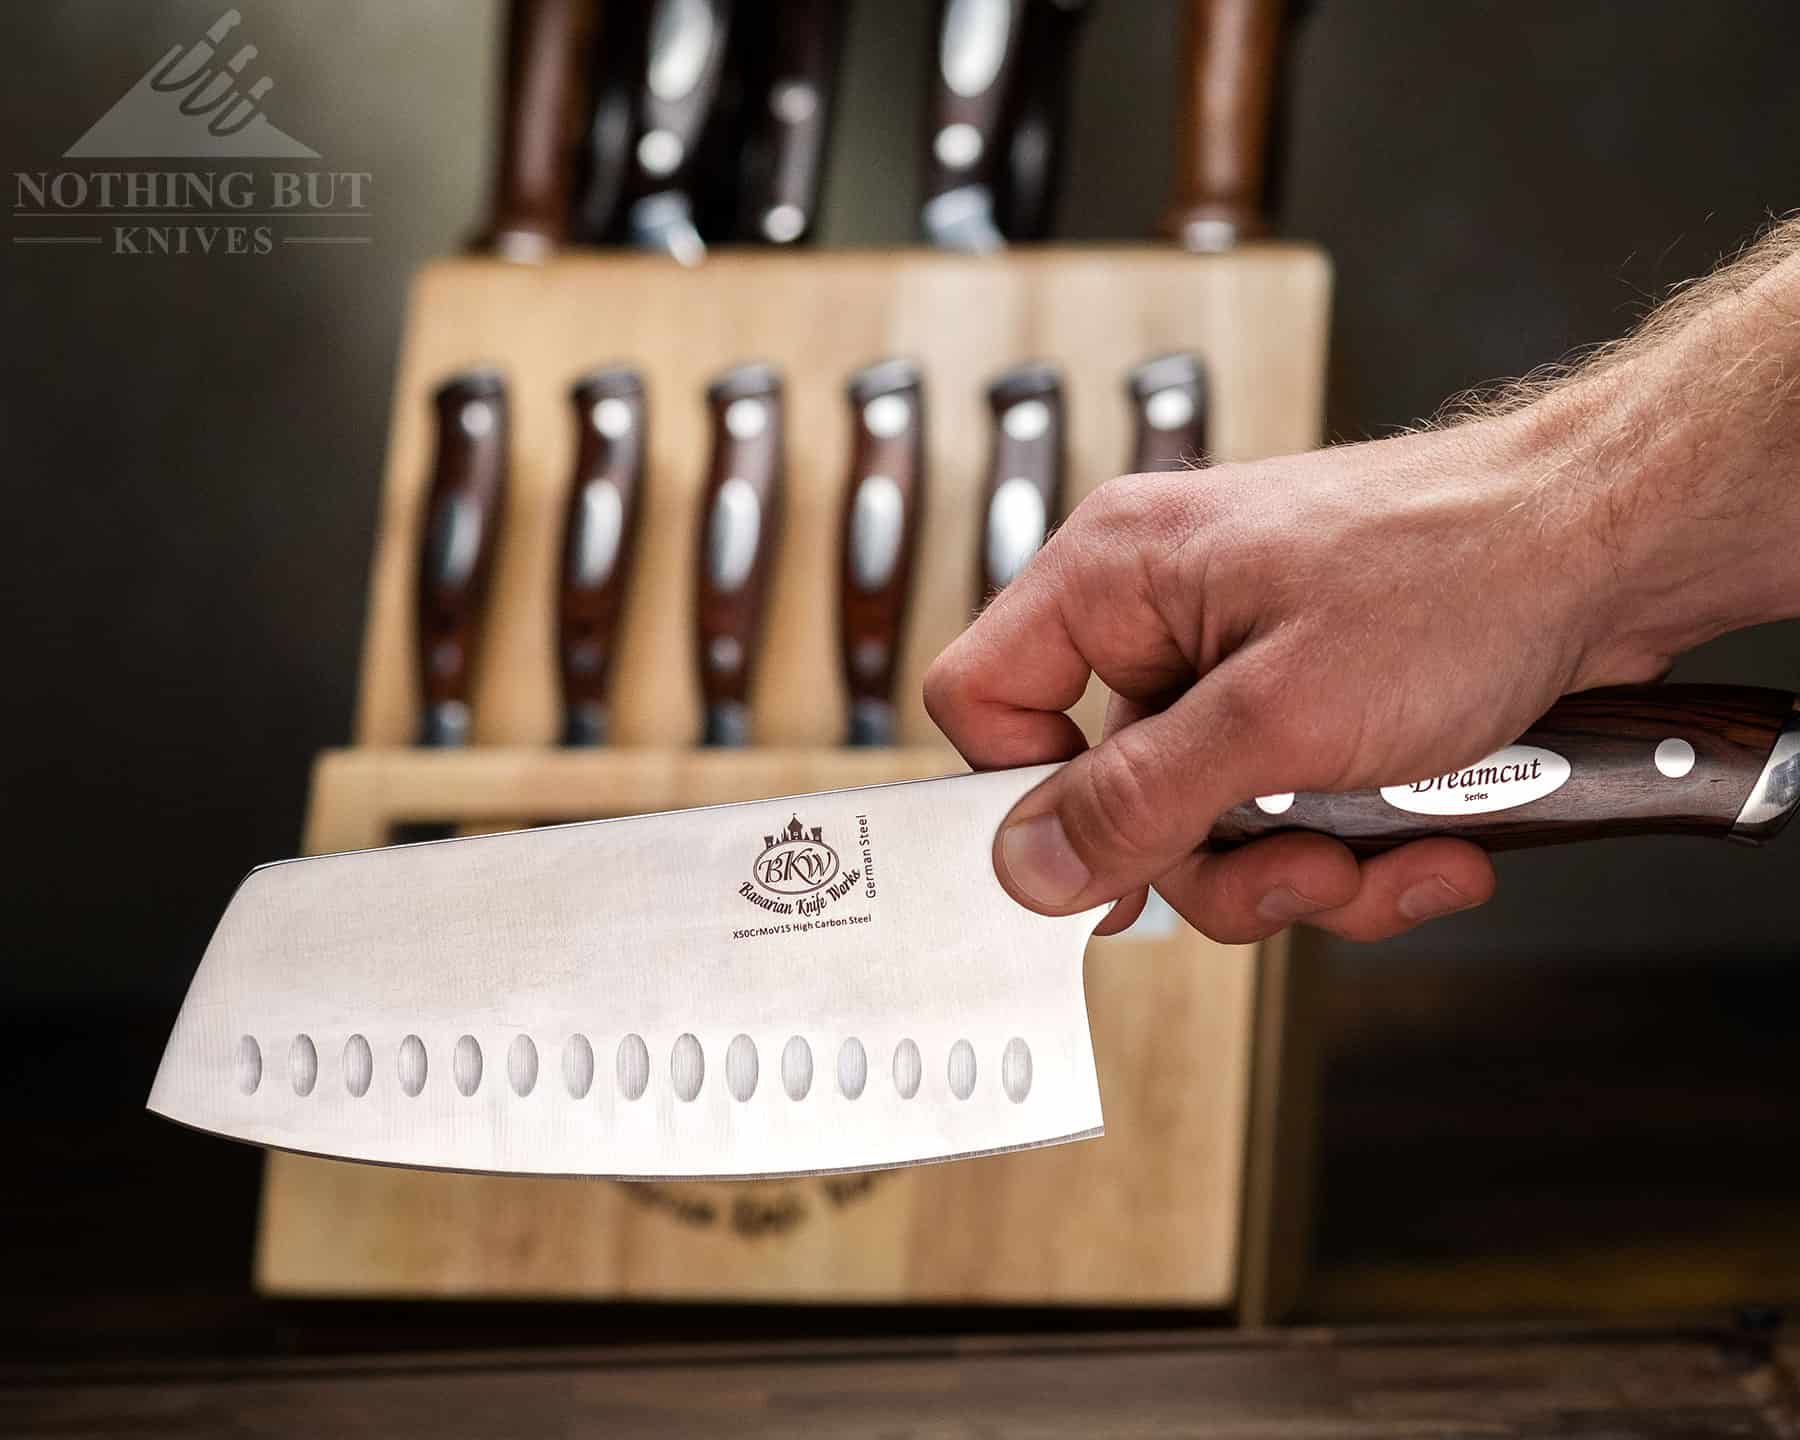 The Bavarian Knife Works cleaver is the heaviest knife in this set, but it’s still pretty maneuverable as far as cleavers go.